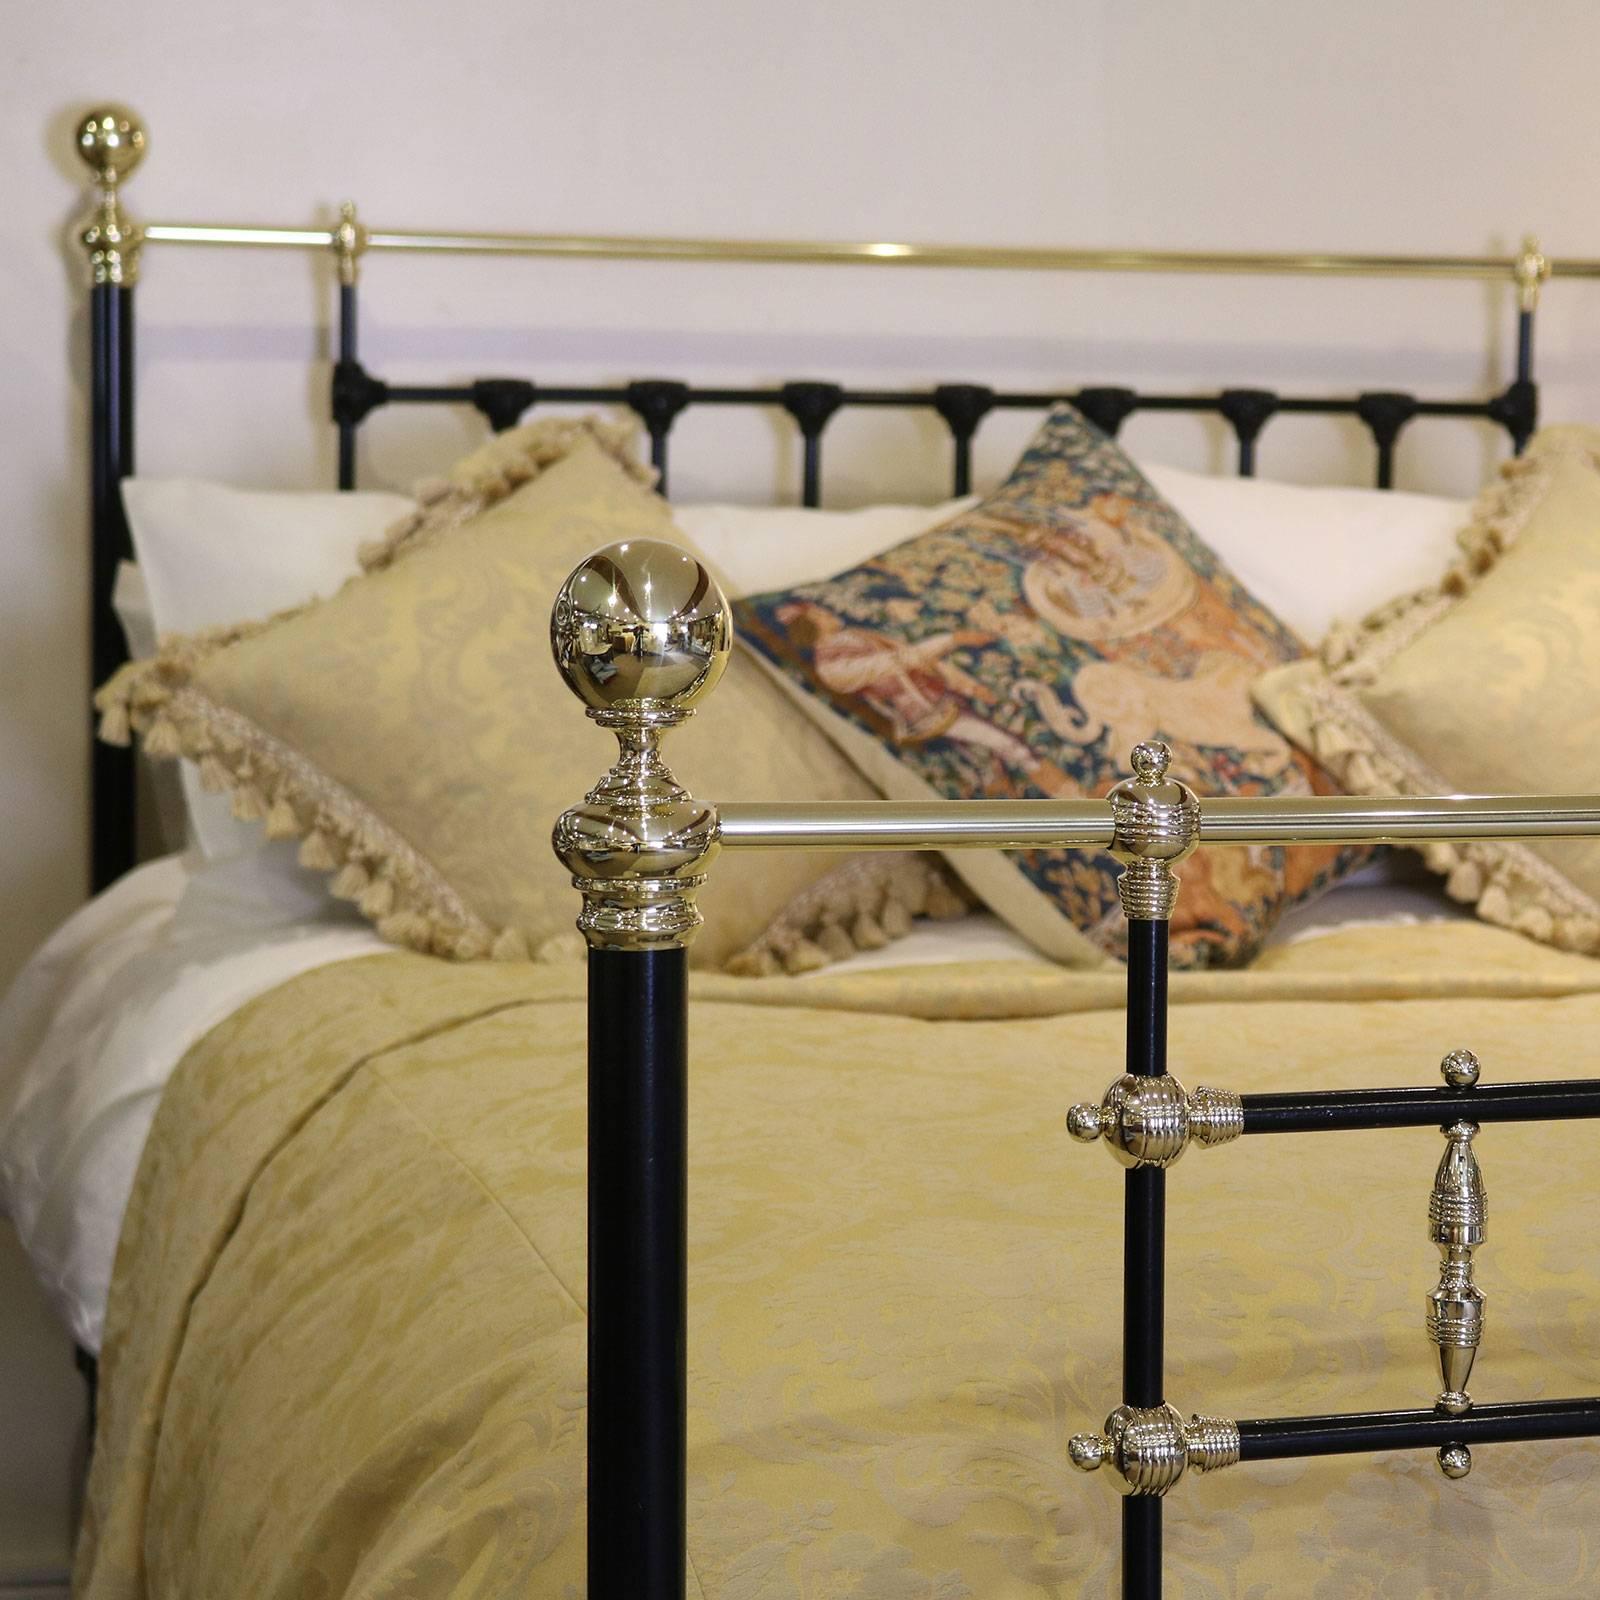 This Victorian brass and iron bed has decorative brass fittings in the foot panel and on the kneecaps. It also has the added advantage of being able to be completely dismantled, which is essential where there is difficult access to the